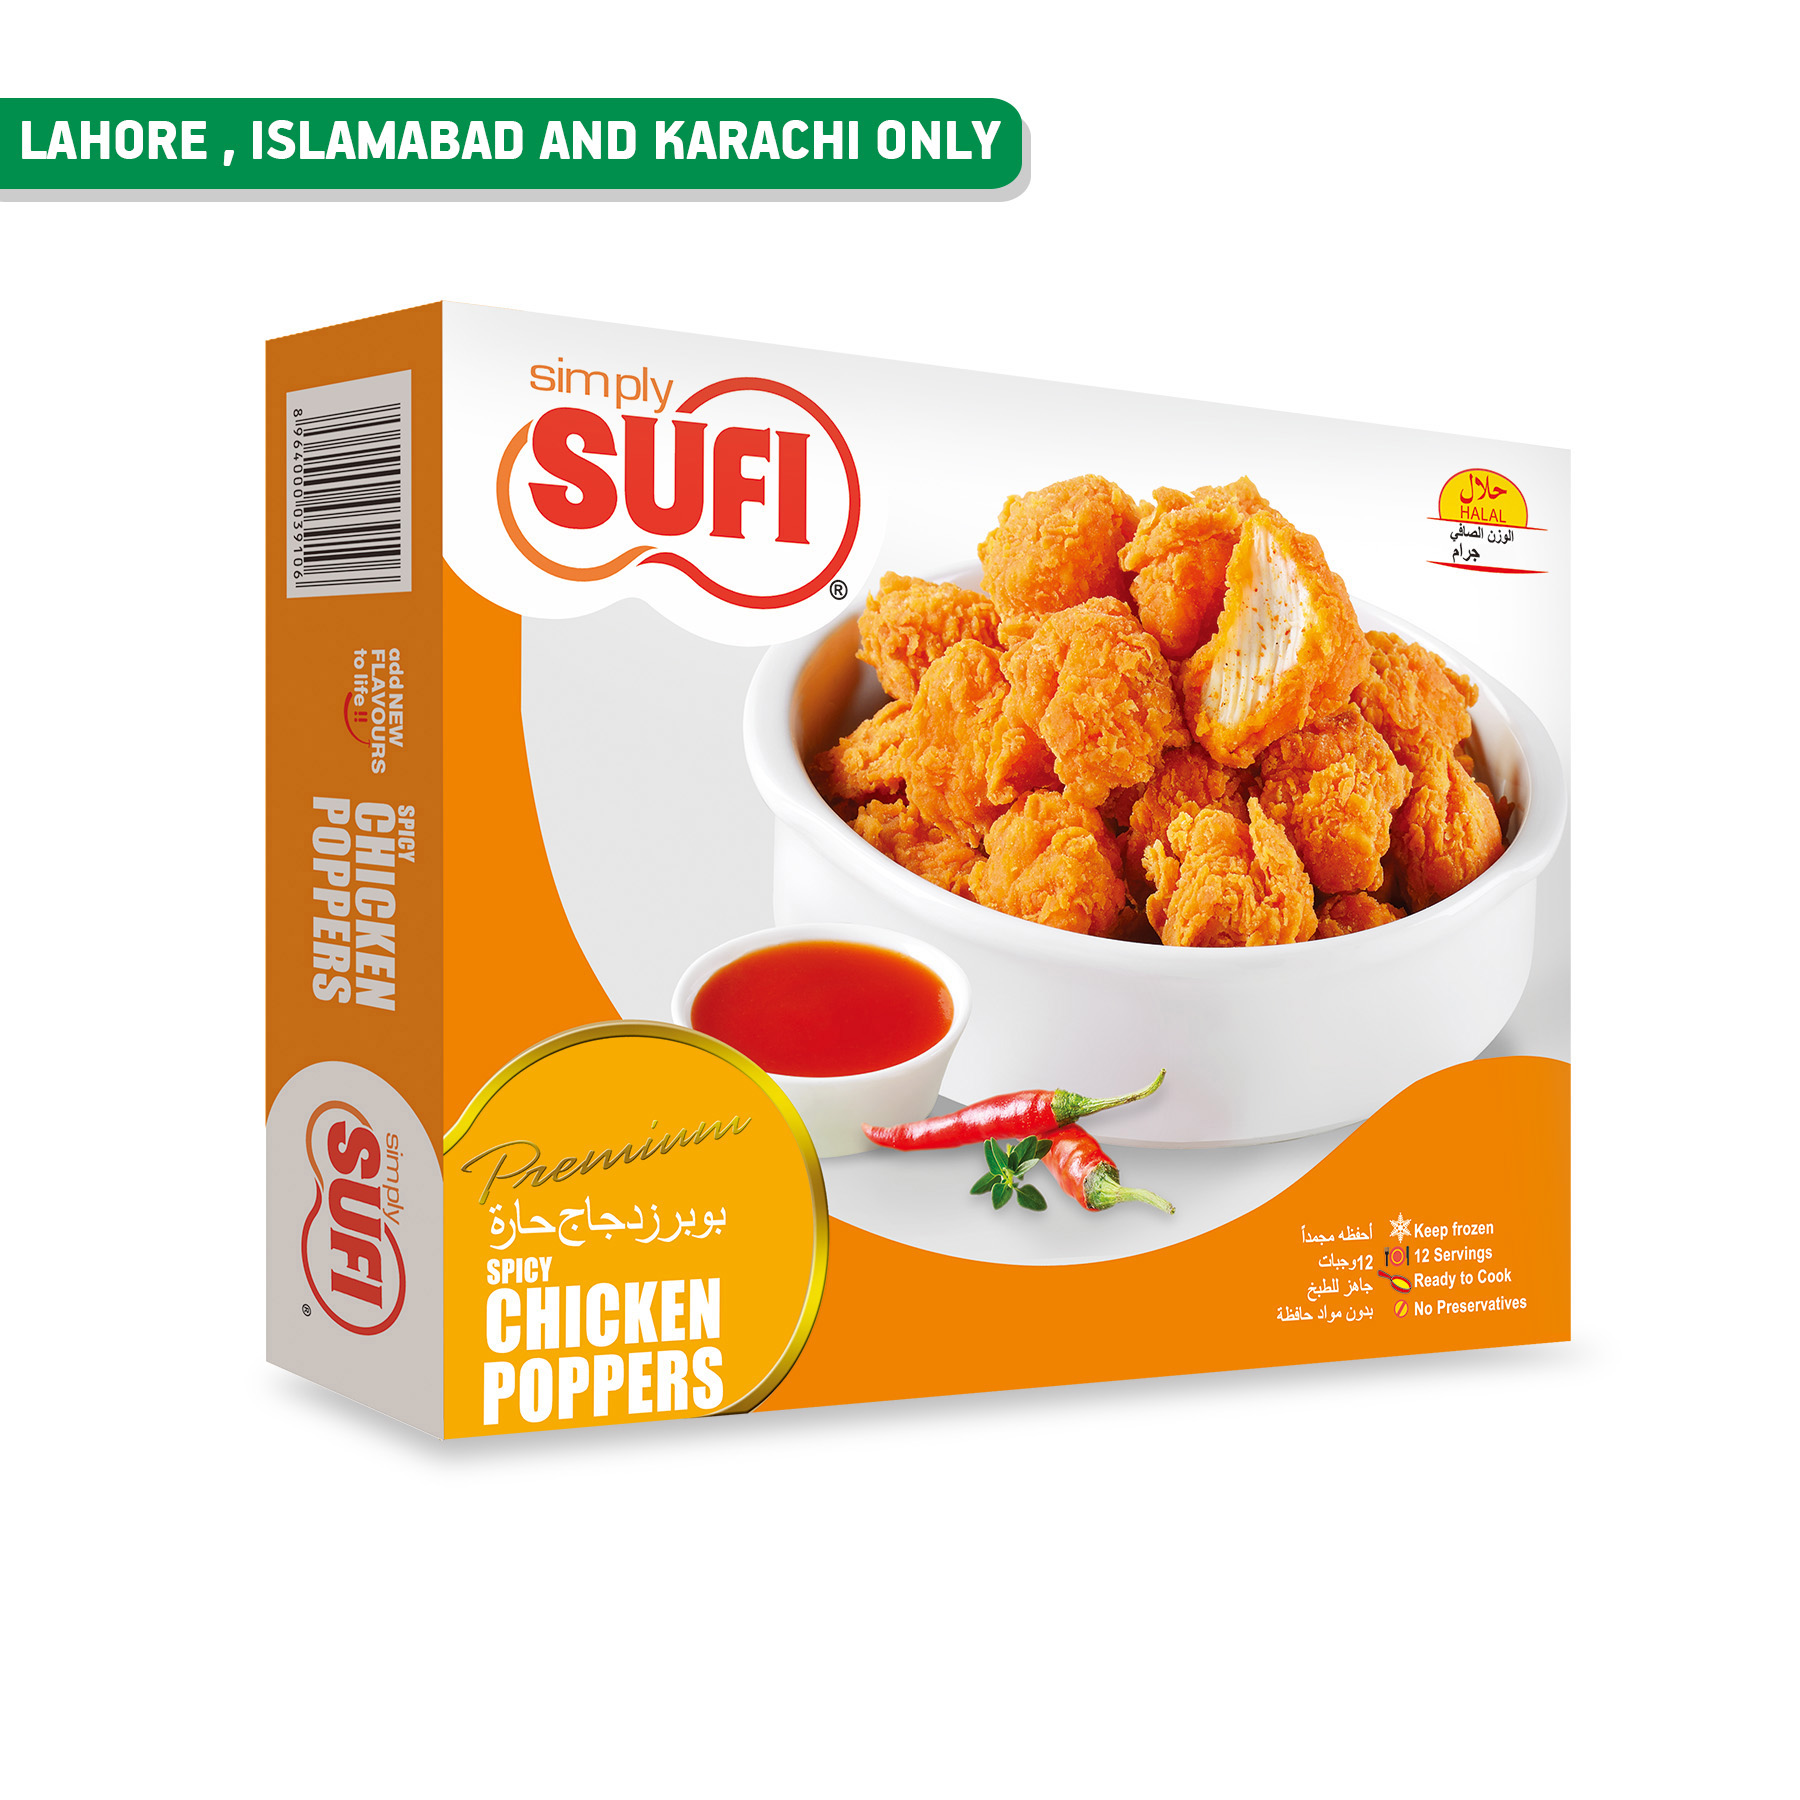 Simply Sufi Spicy Chicken Poppers